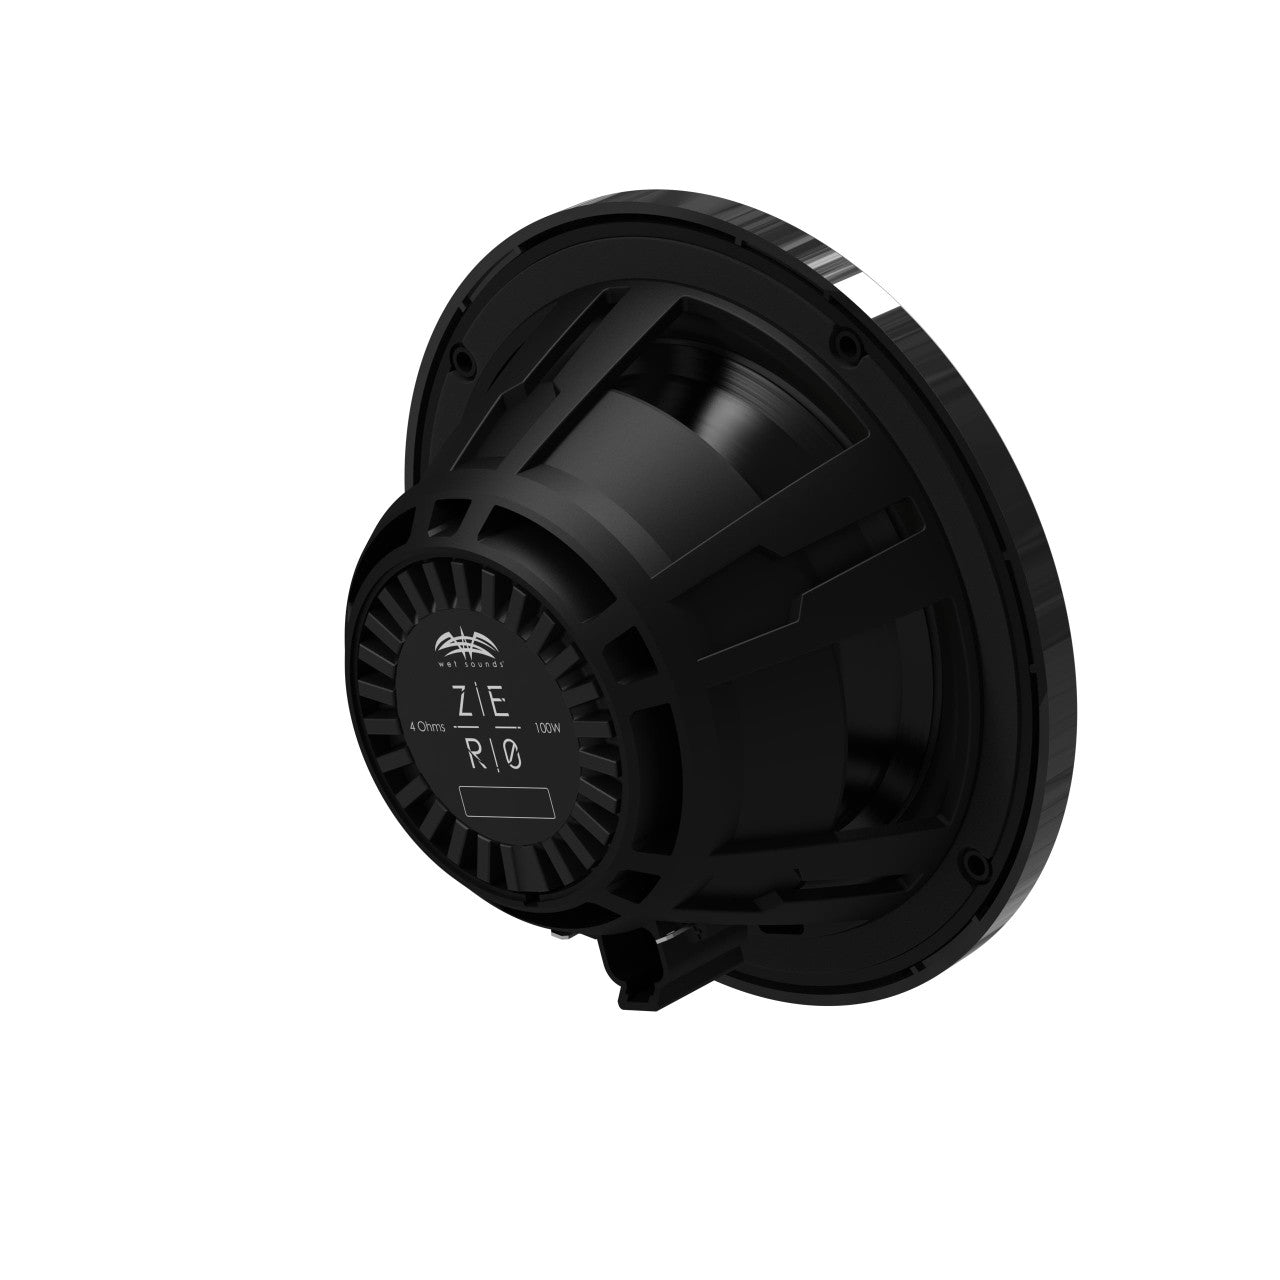 Wet Sounds ZERO 6 XZ-W Neodymium Powersport & Marine Speakers with Horn-Loaded Titanium Tweeters, Pair, Compatible with 2014 + Harley Davidson Touring Models